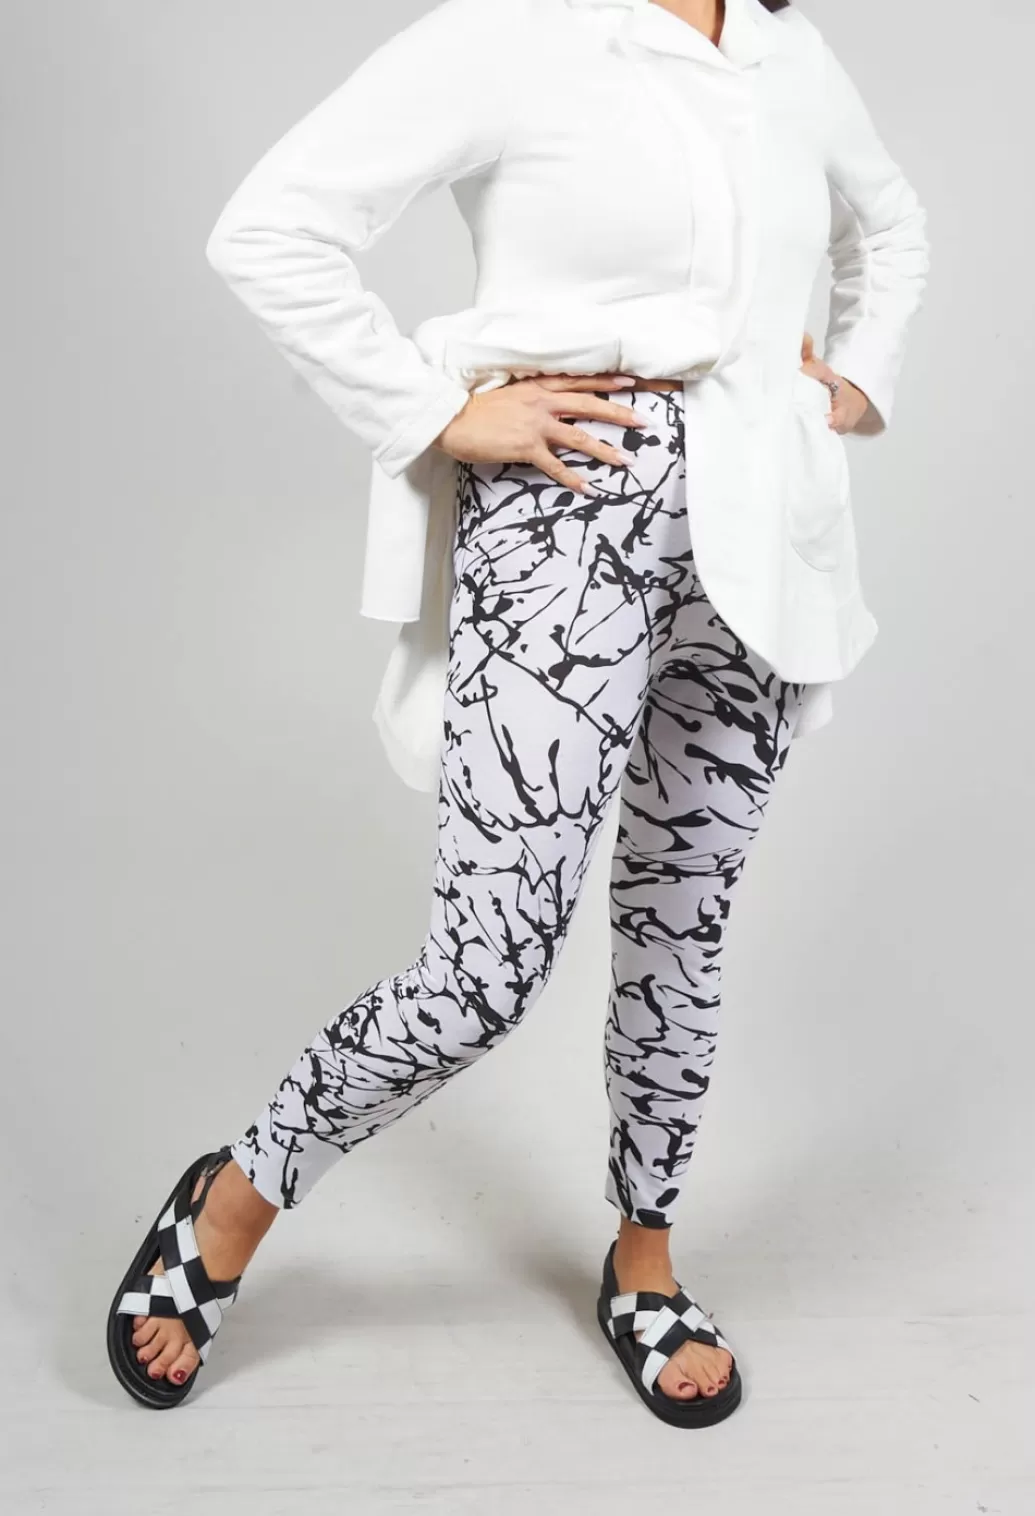 Leggings^Bread and Butter Ankle Cropped Leggings In White With Black Print